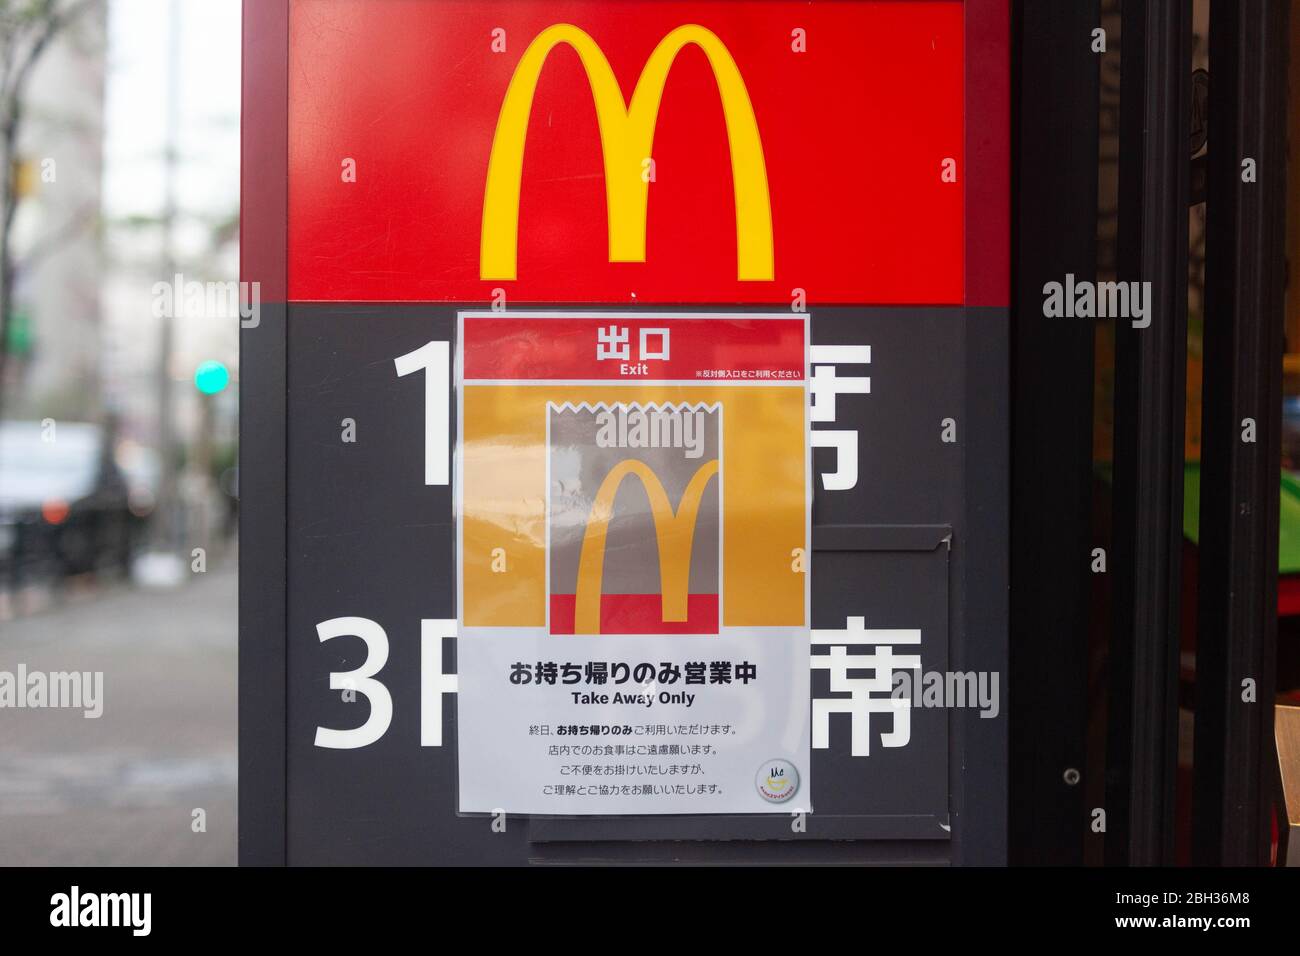 A sign outside a McDonald's restaurant in Shinjuku, Tokyo, Japan informs customers that only take-away is available, April 21, 2020. On April 21, 2020, McDonald's Japan decided to stop offering eat-in service at 1, 900 of their restaurants around Japan, in an effort to prevent the spread of COVID-19 coronavirus. Photographer credit Niclas Ericsson. () Stock Photo